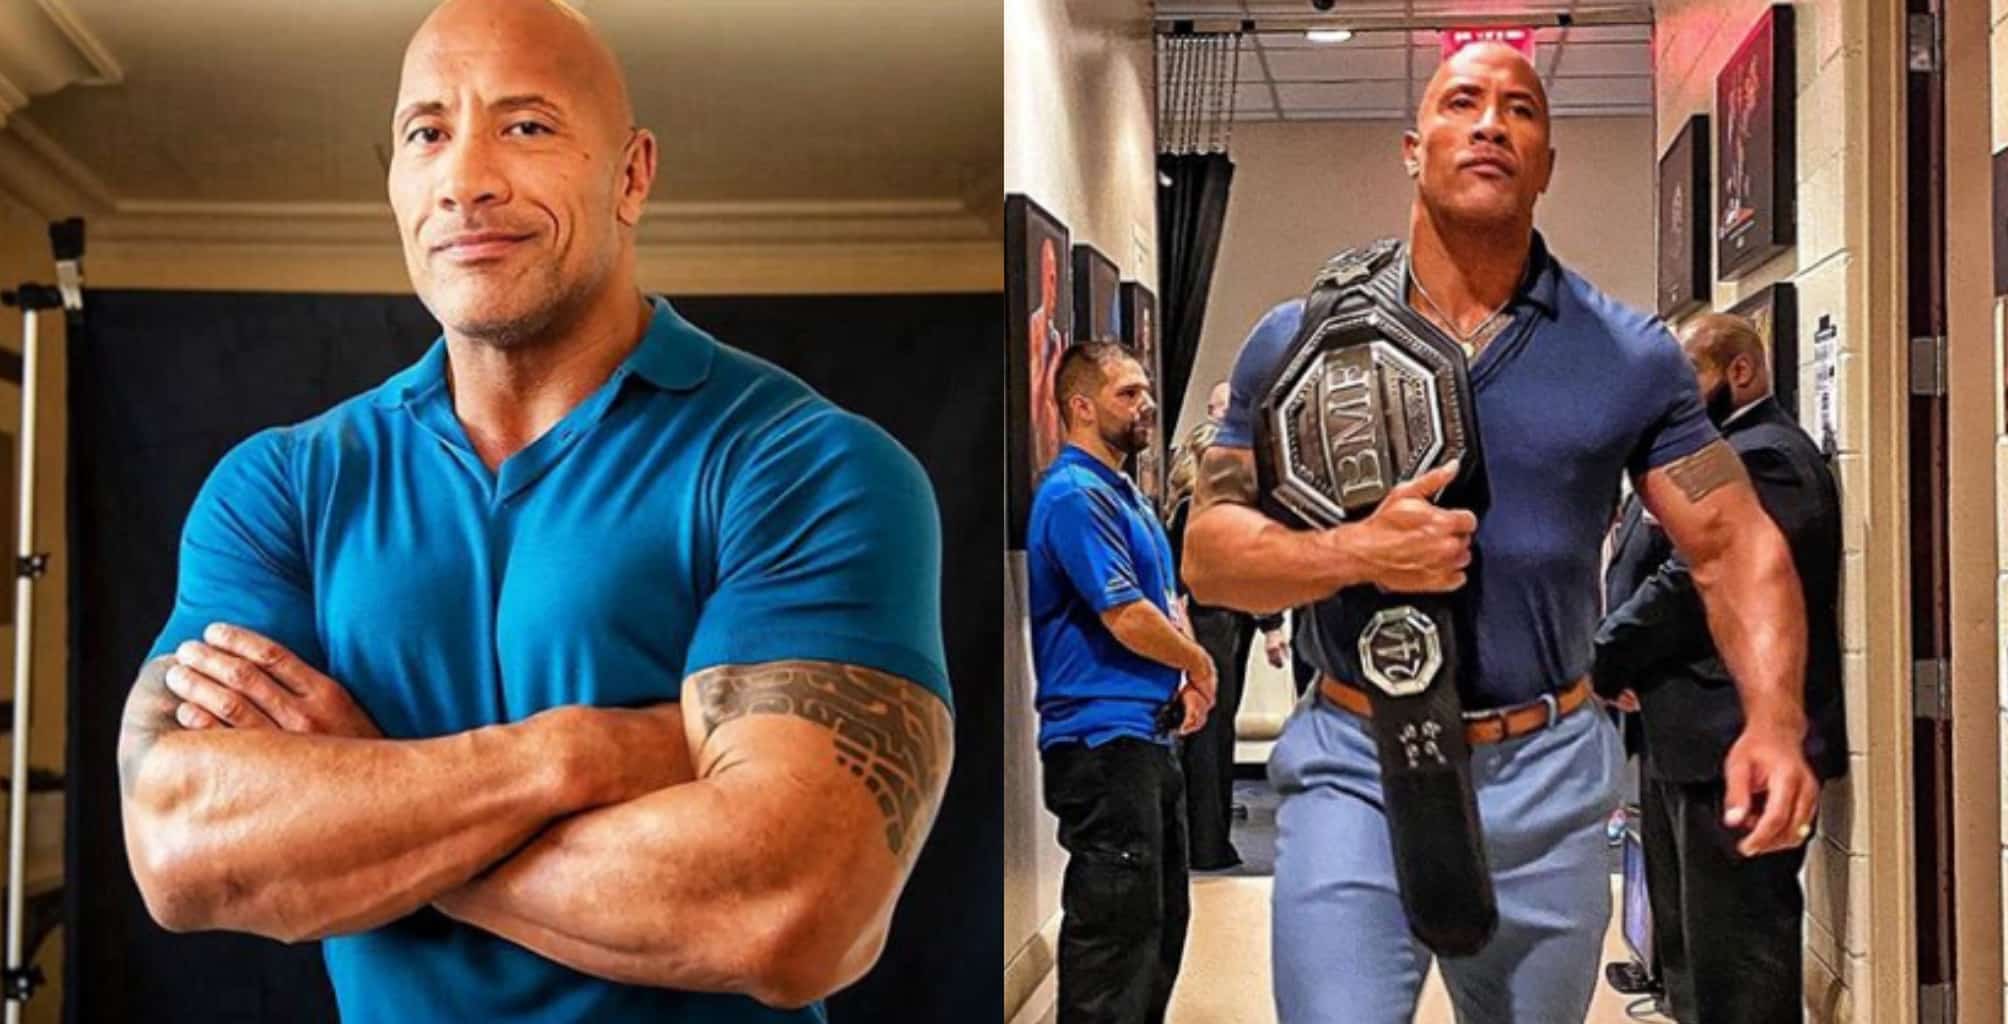 The Rock becomes world's 3rd most followed individual on Instagram with 183 million followers